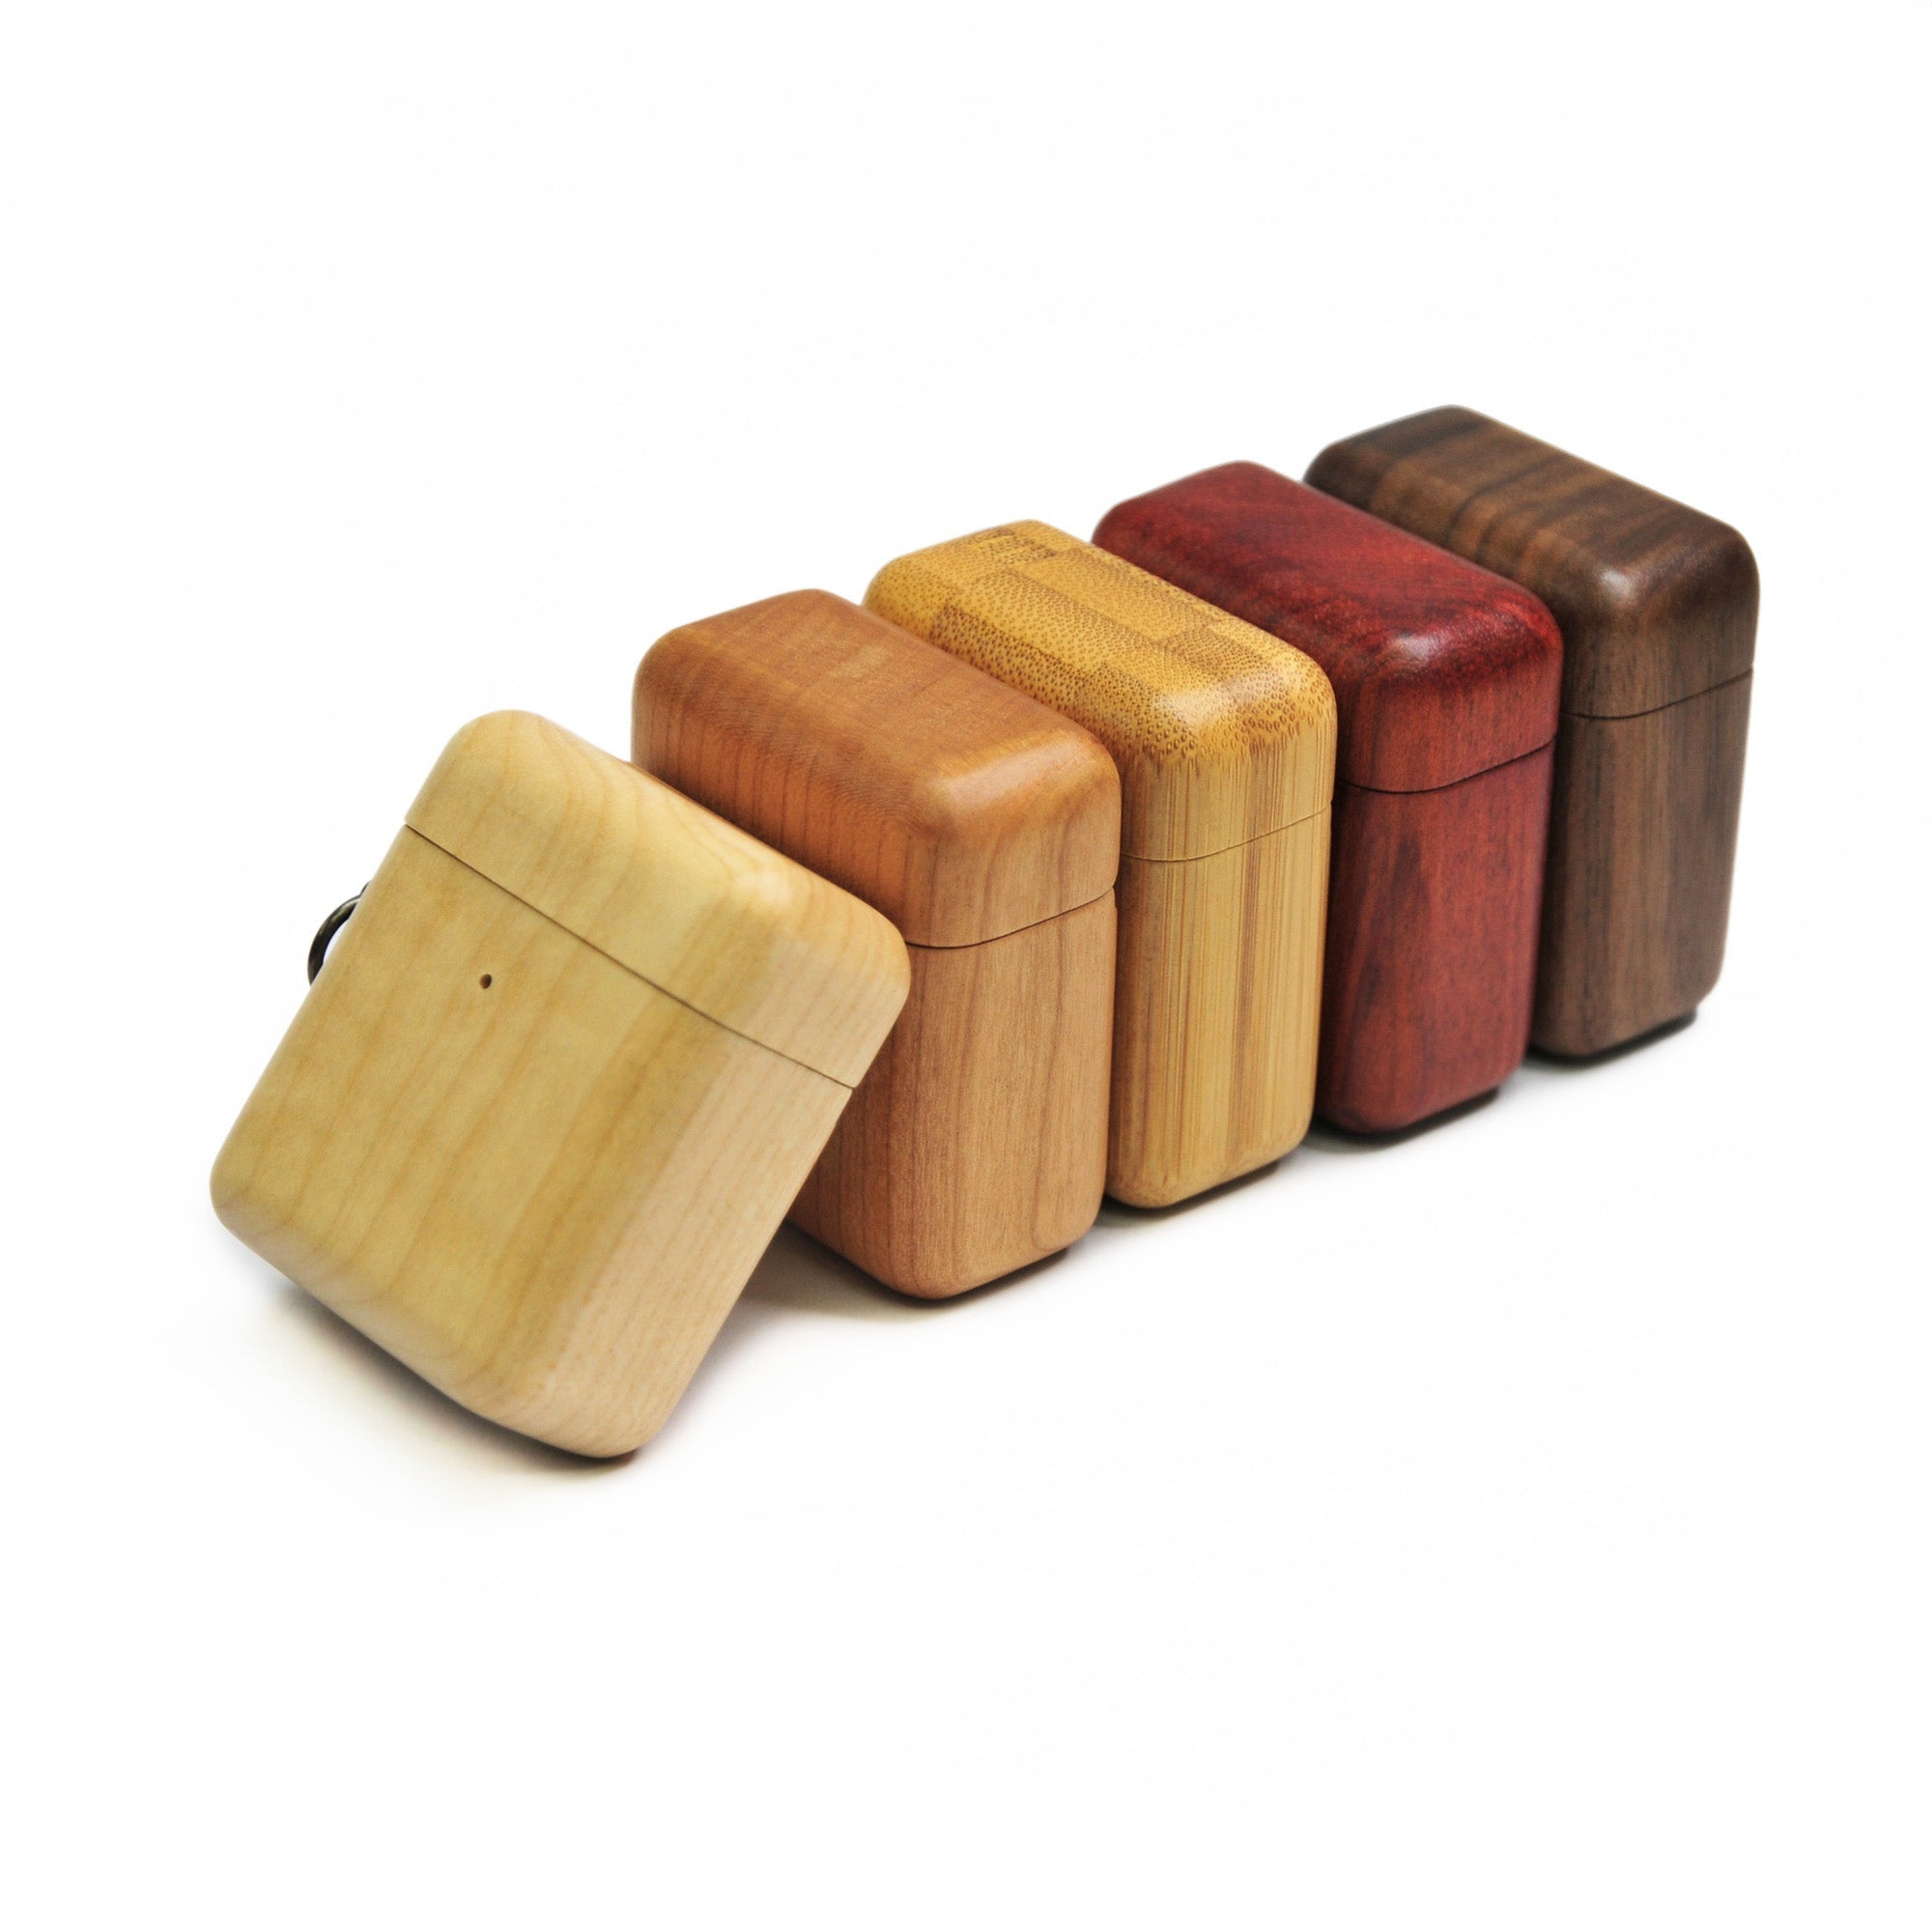 5 types of Wood Airpods 1st and 2nd Generation Case